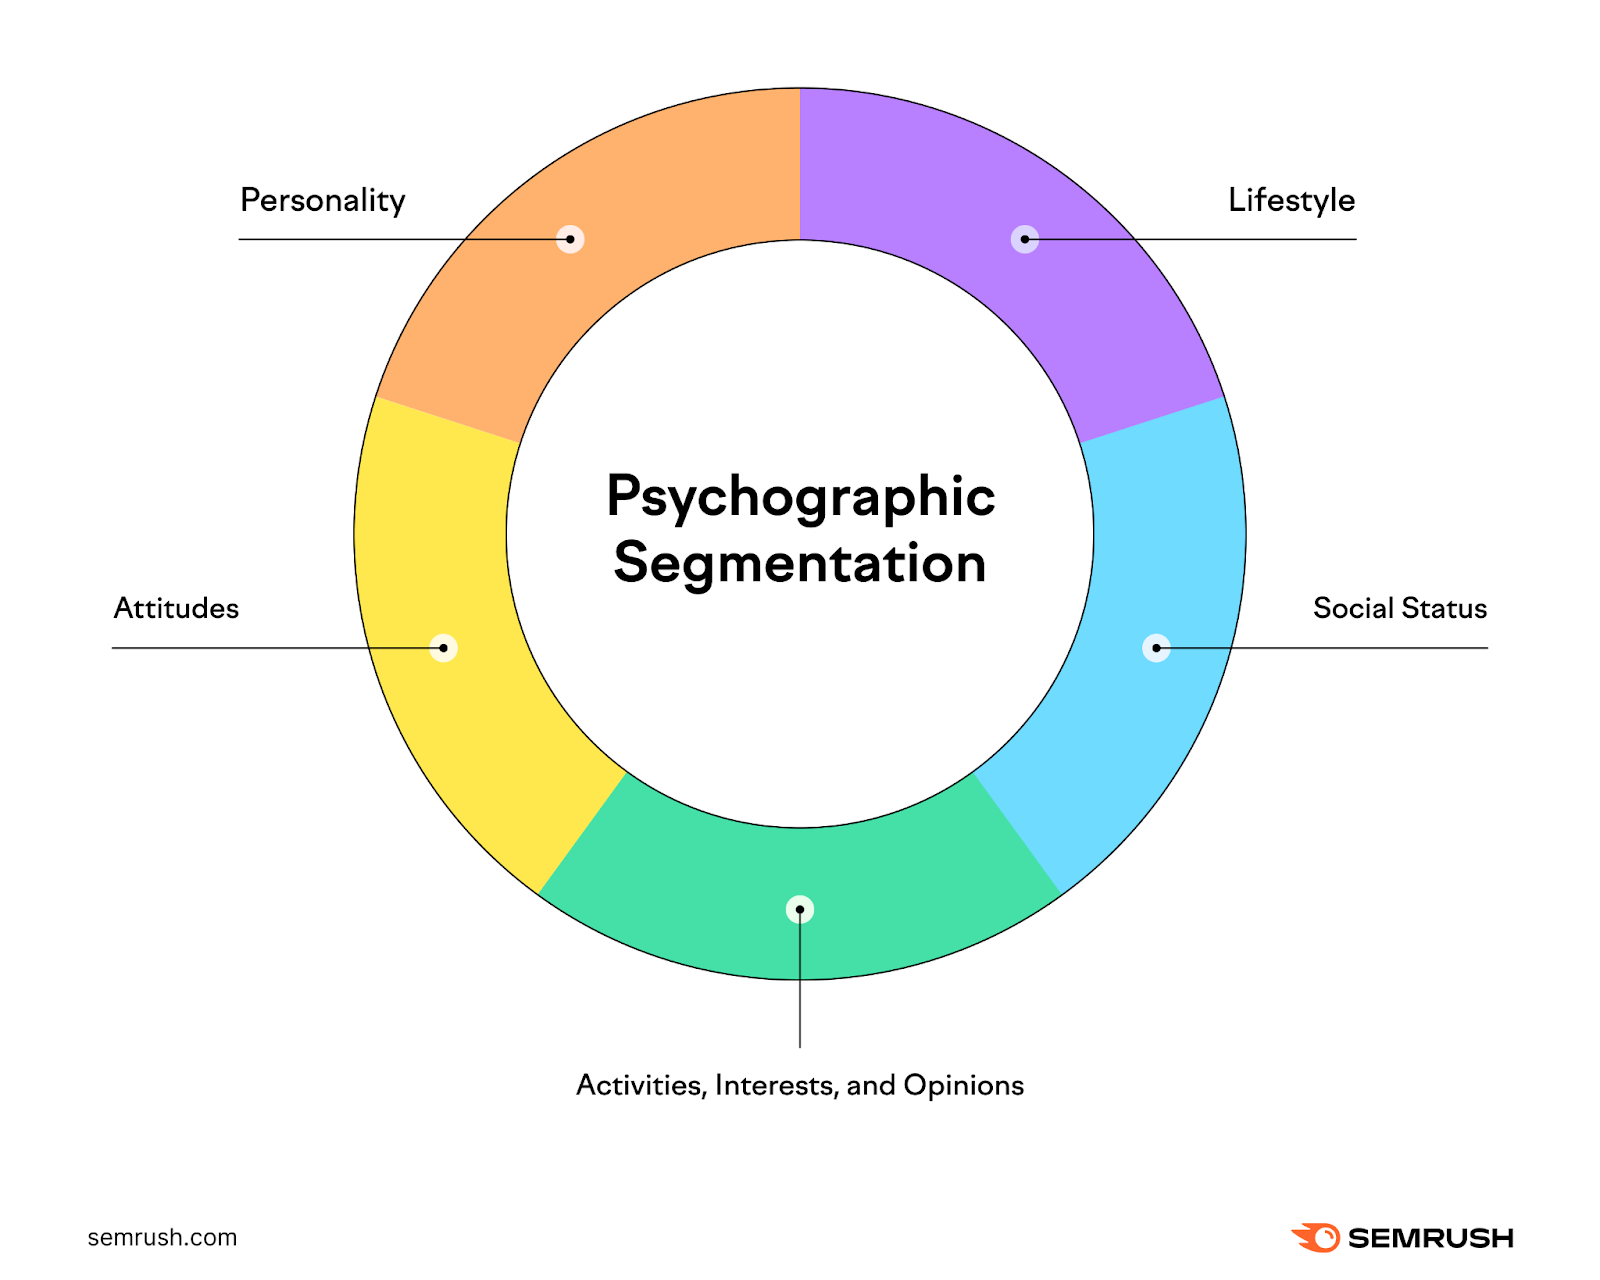 Psychographic segmentation circle listing different criteria, like personality, lifestyle, social status, attributes, activities, interests, and opinions